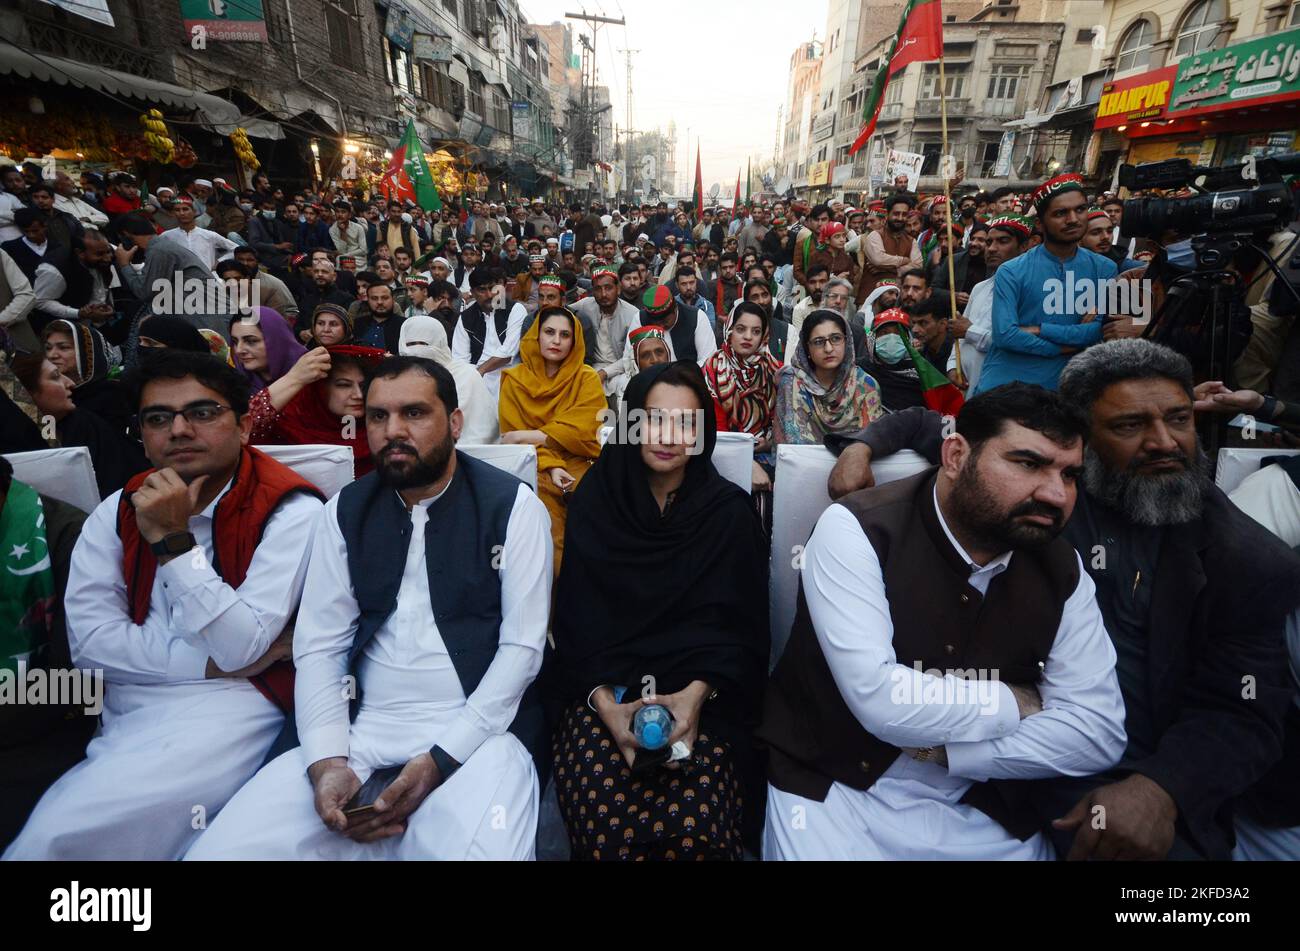 Peshawar, Khyber Pakhtunkhwa, Pakistan. 17th Nov, 2022. Supporters watch a video-linked address of former Prime Minister Imran Khan, head of the Pakistan Tehrik-e-Insaf (PTI) party, as the protest march continues followings its resumption, days after an assassination attempt on the former prime minister halted the rally at G T Road in Peshawar. The march to the capital Islamabad resumed from eastern Punjab Wazirabad city, as Khan keeps pressing for snap elections, a demand rejected by the government of Prime Minister Sharif. The Tehreek-e-Insaf party began its march from Lahore in late Octo Stock Photo